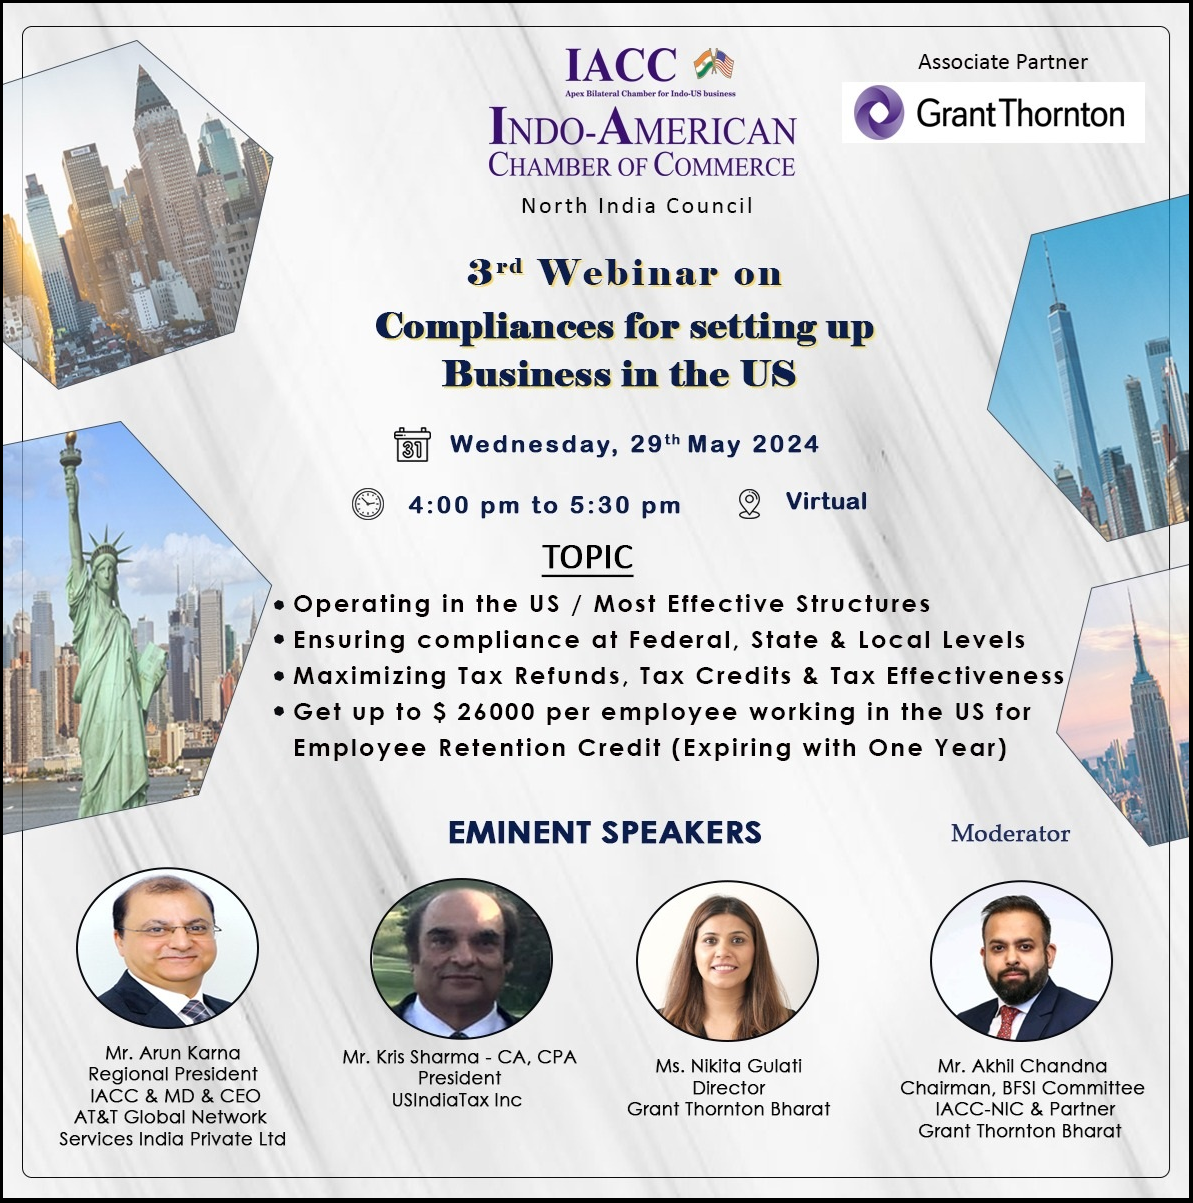 Webinar on “Compliances for Setting up Business in the US” on 29.05.2024 from 4:00 pm to 5:30 pm (IST)